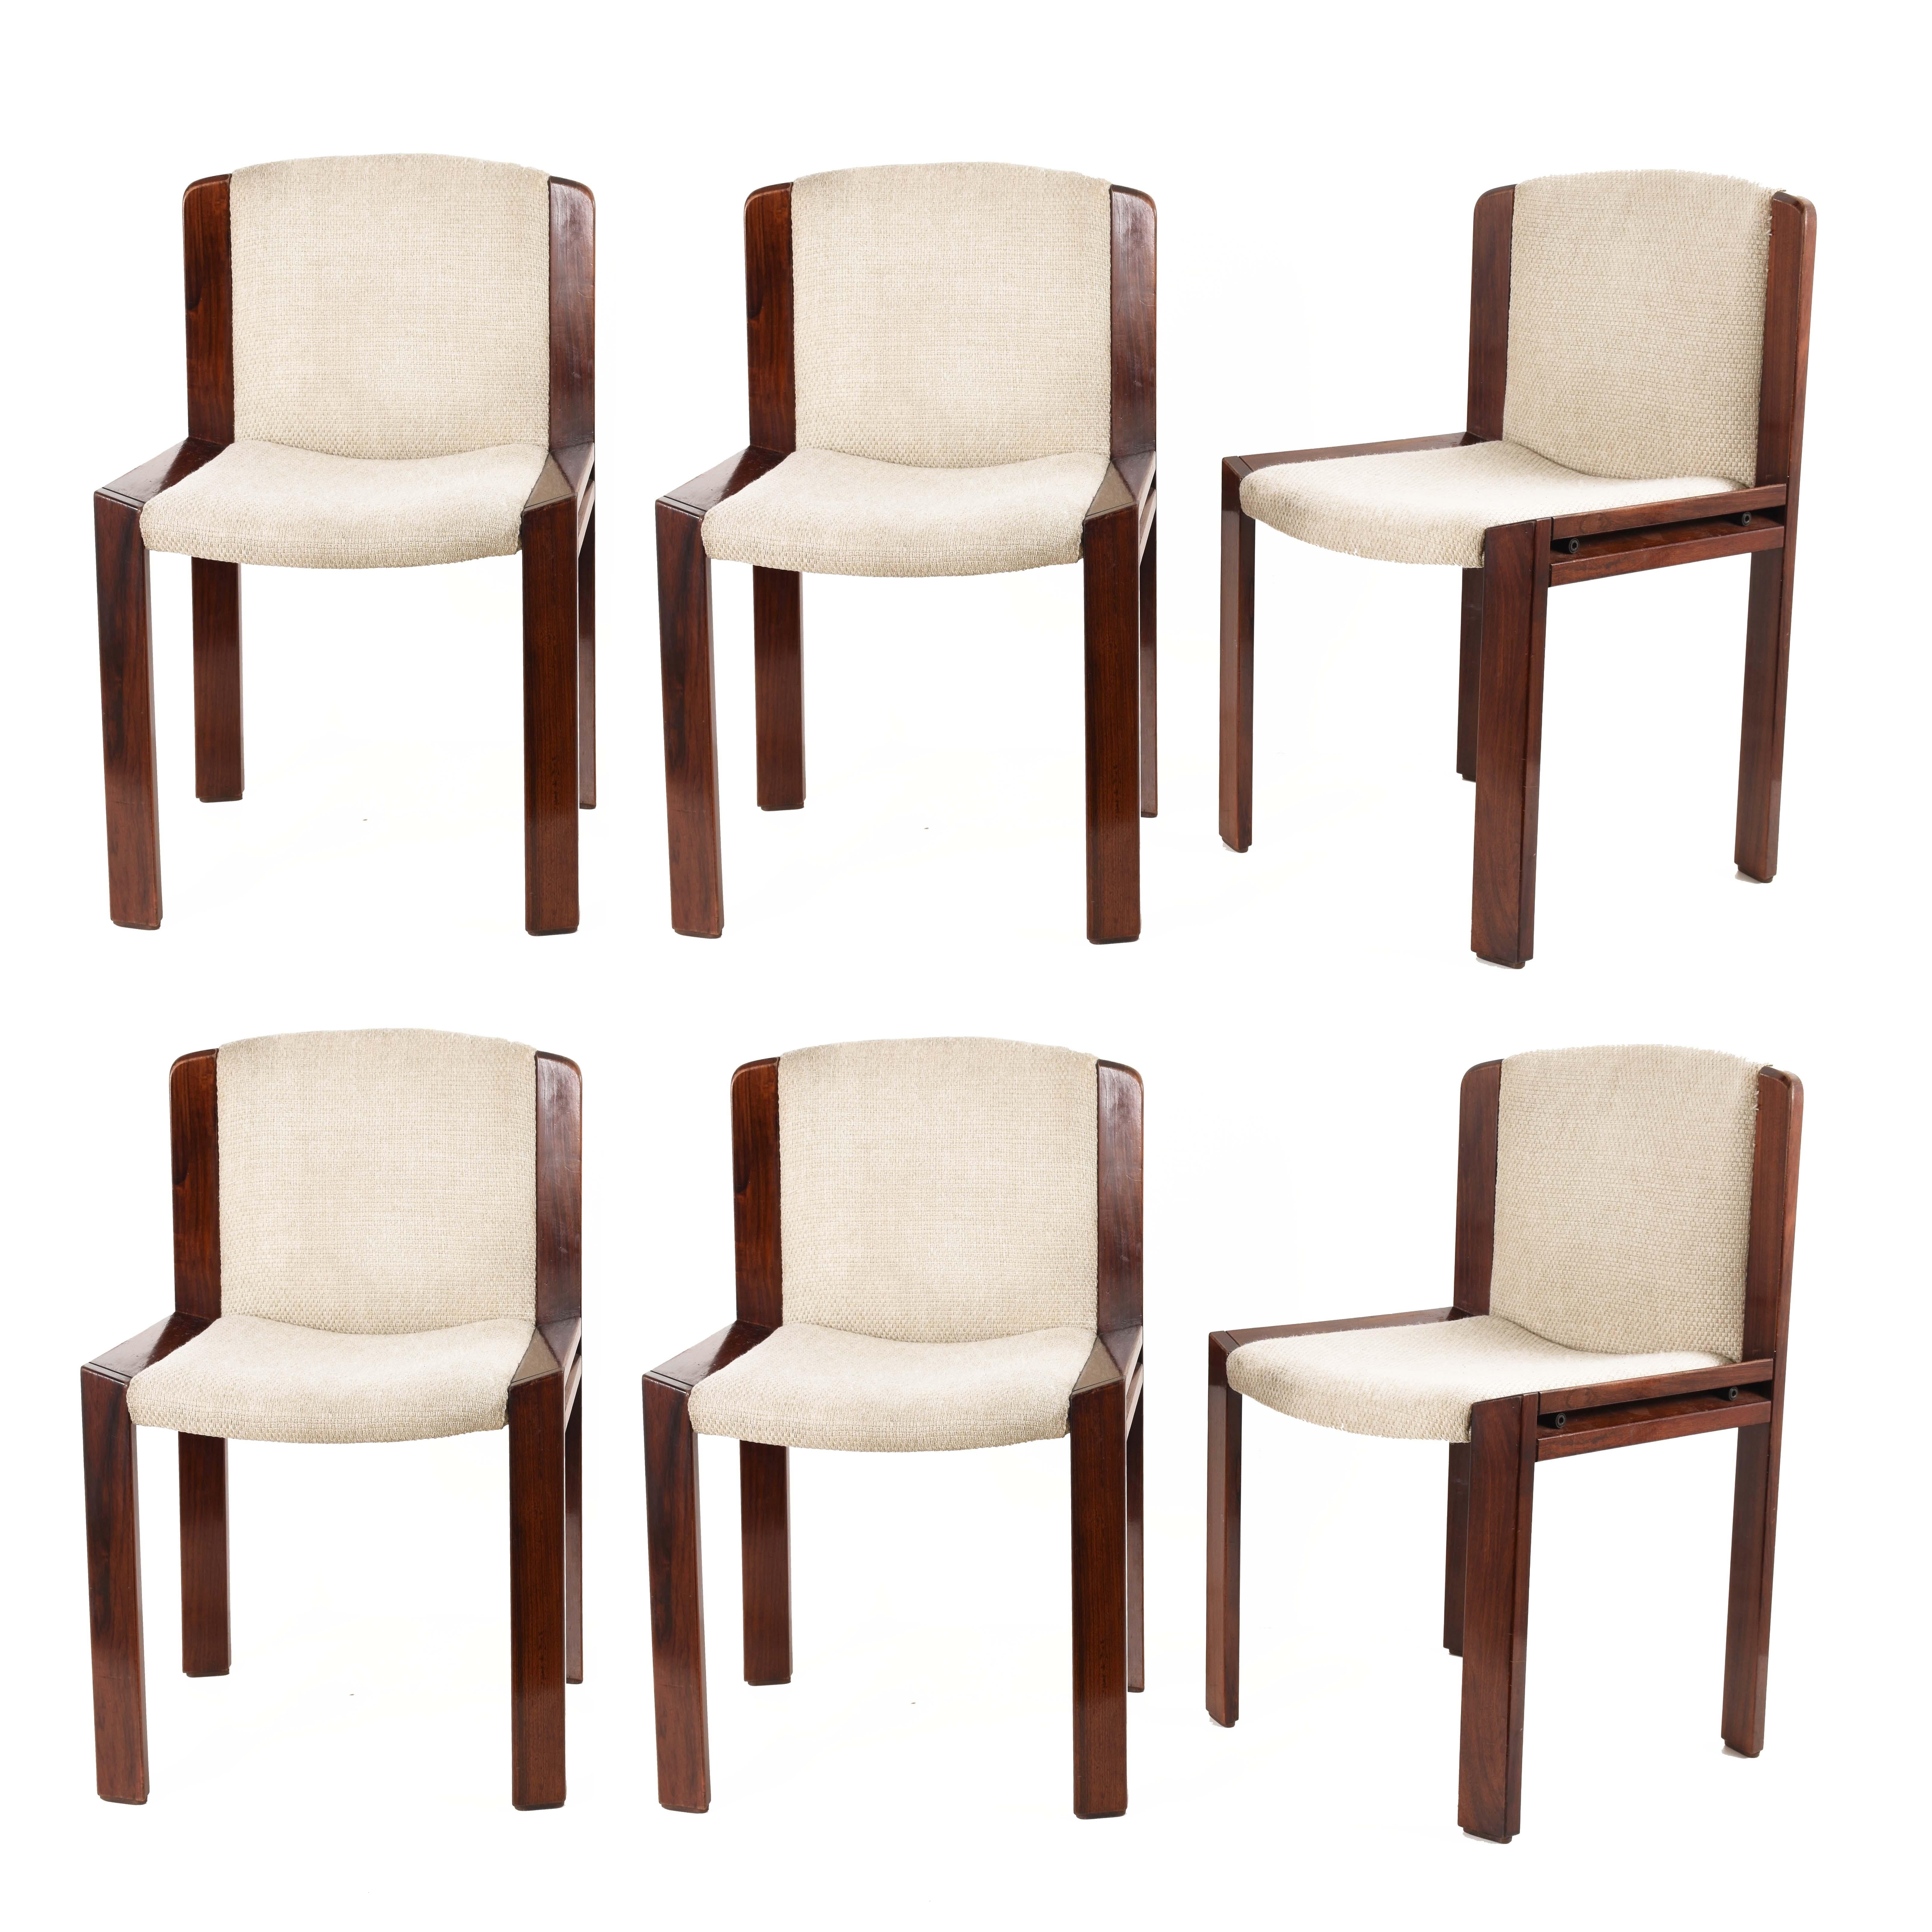 Set of Six Chairs by Joe Colombo for Pozzi, Solid wood, Italy 1965s